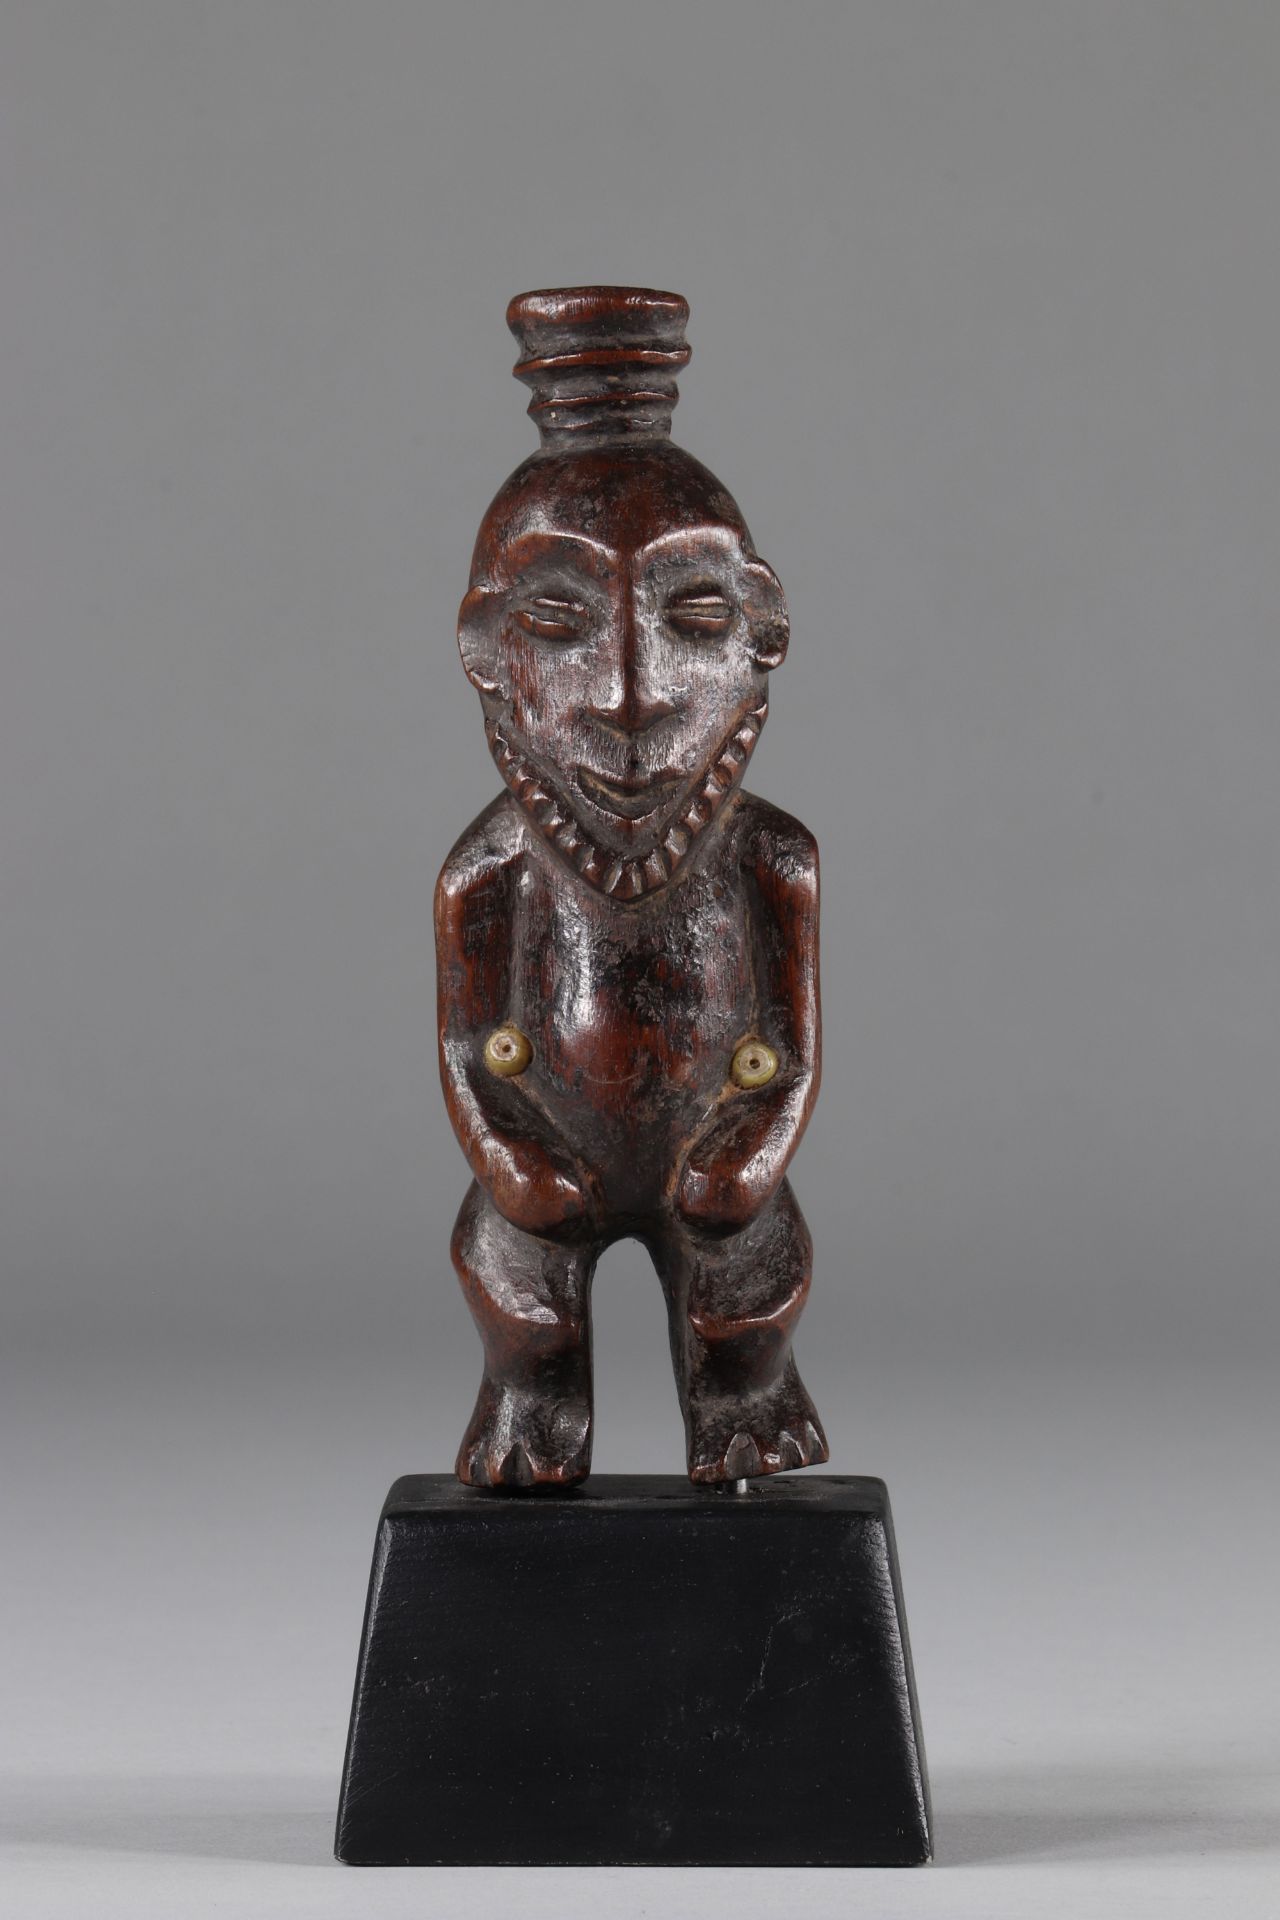 Kusu, DRC, Fetish representing wisdom, wood, glass beads, old patina of use, late 19th early 20th ce